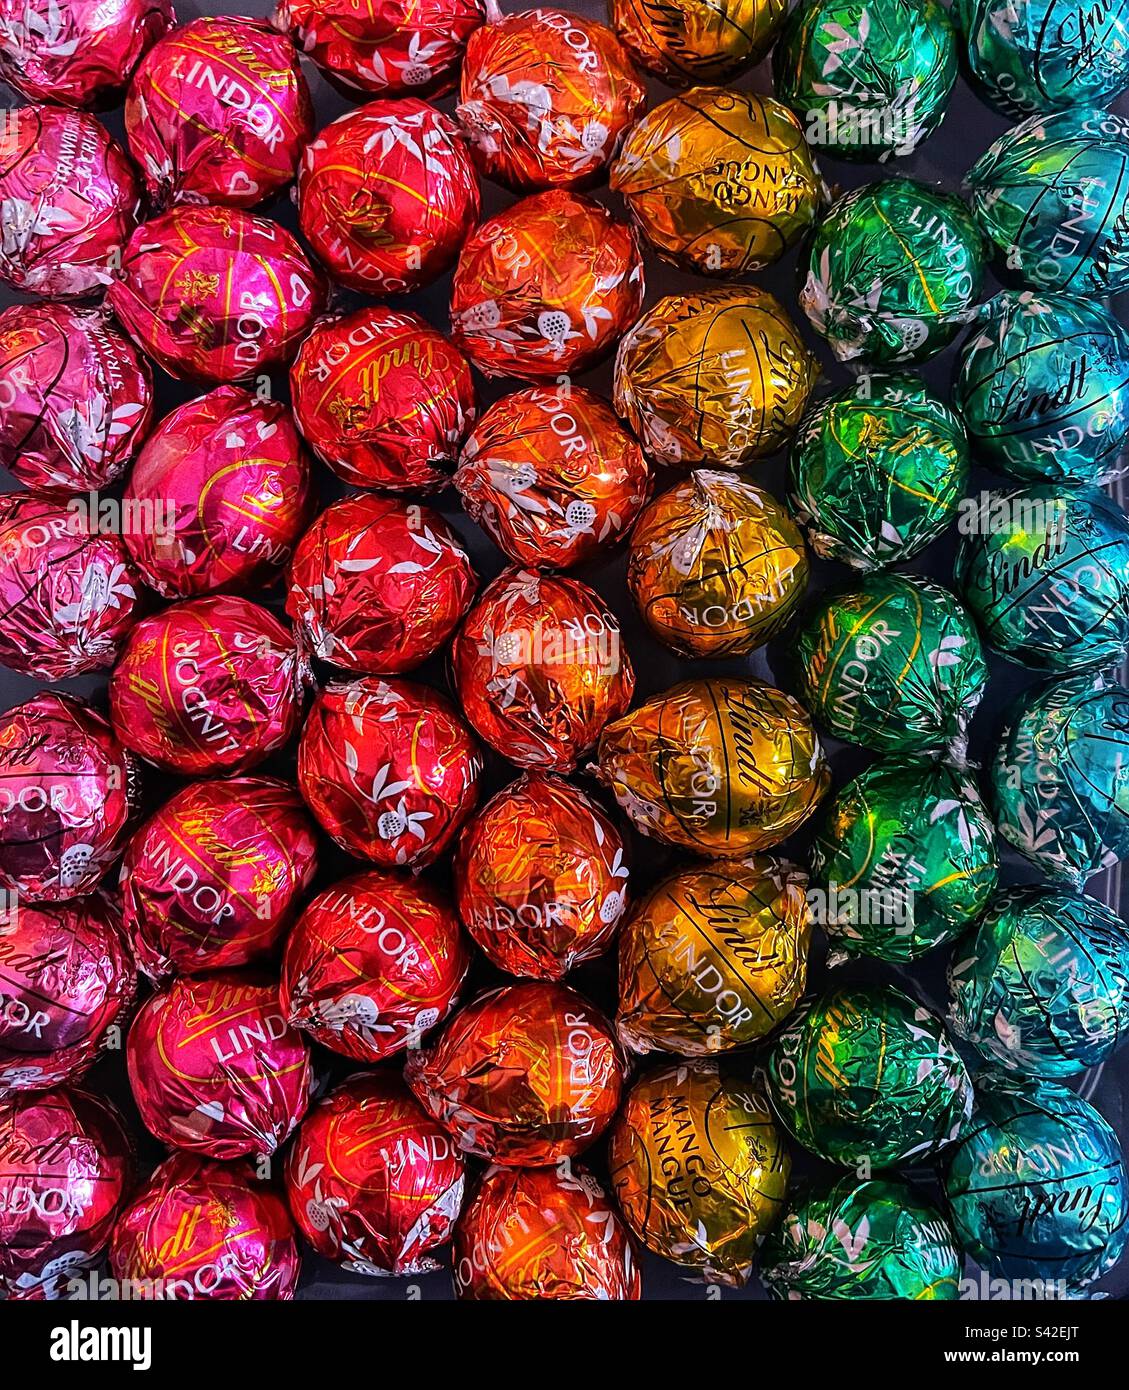 Lindt chocolate wrapped in colourful foils lined in a rainbow effect Stock Photo